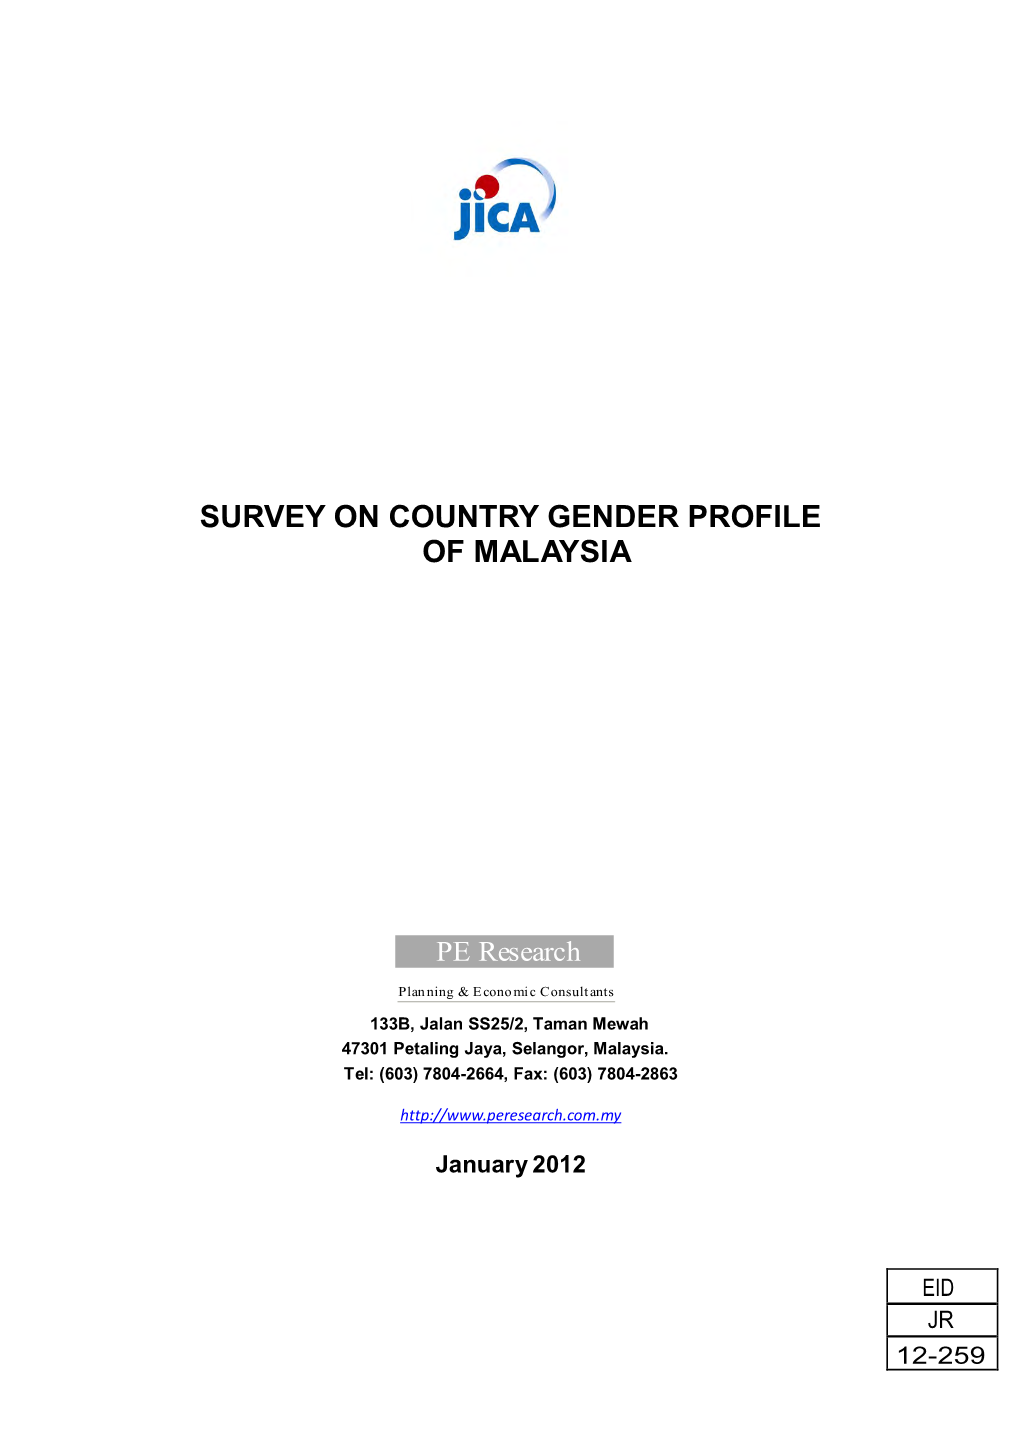 Survey on Country Gender Profile of Malaysia